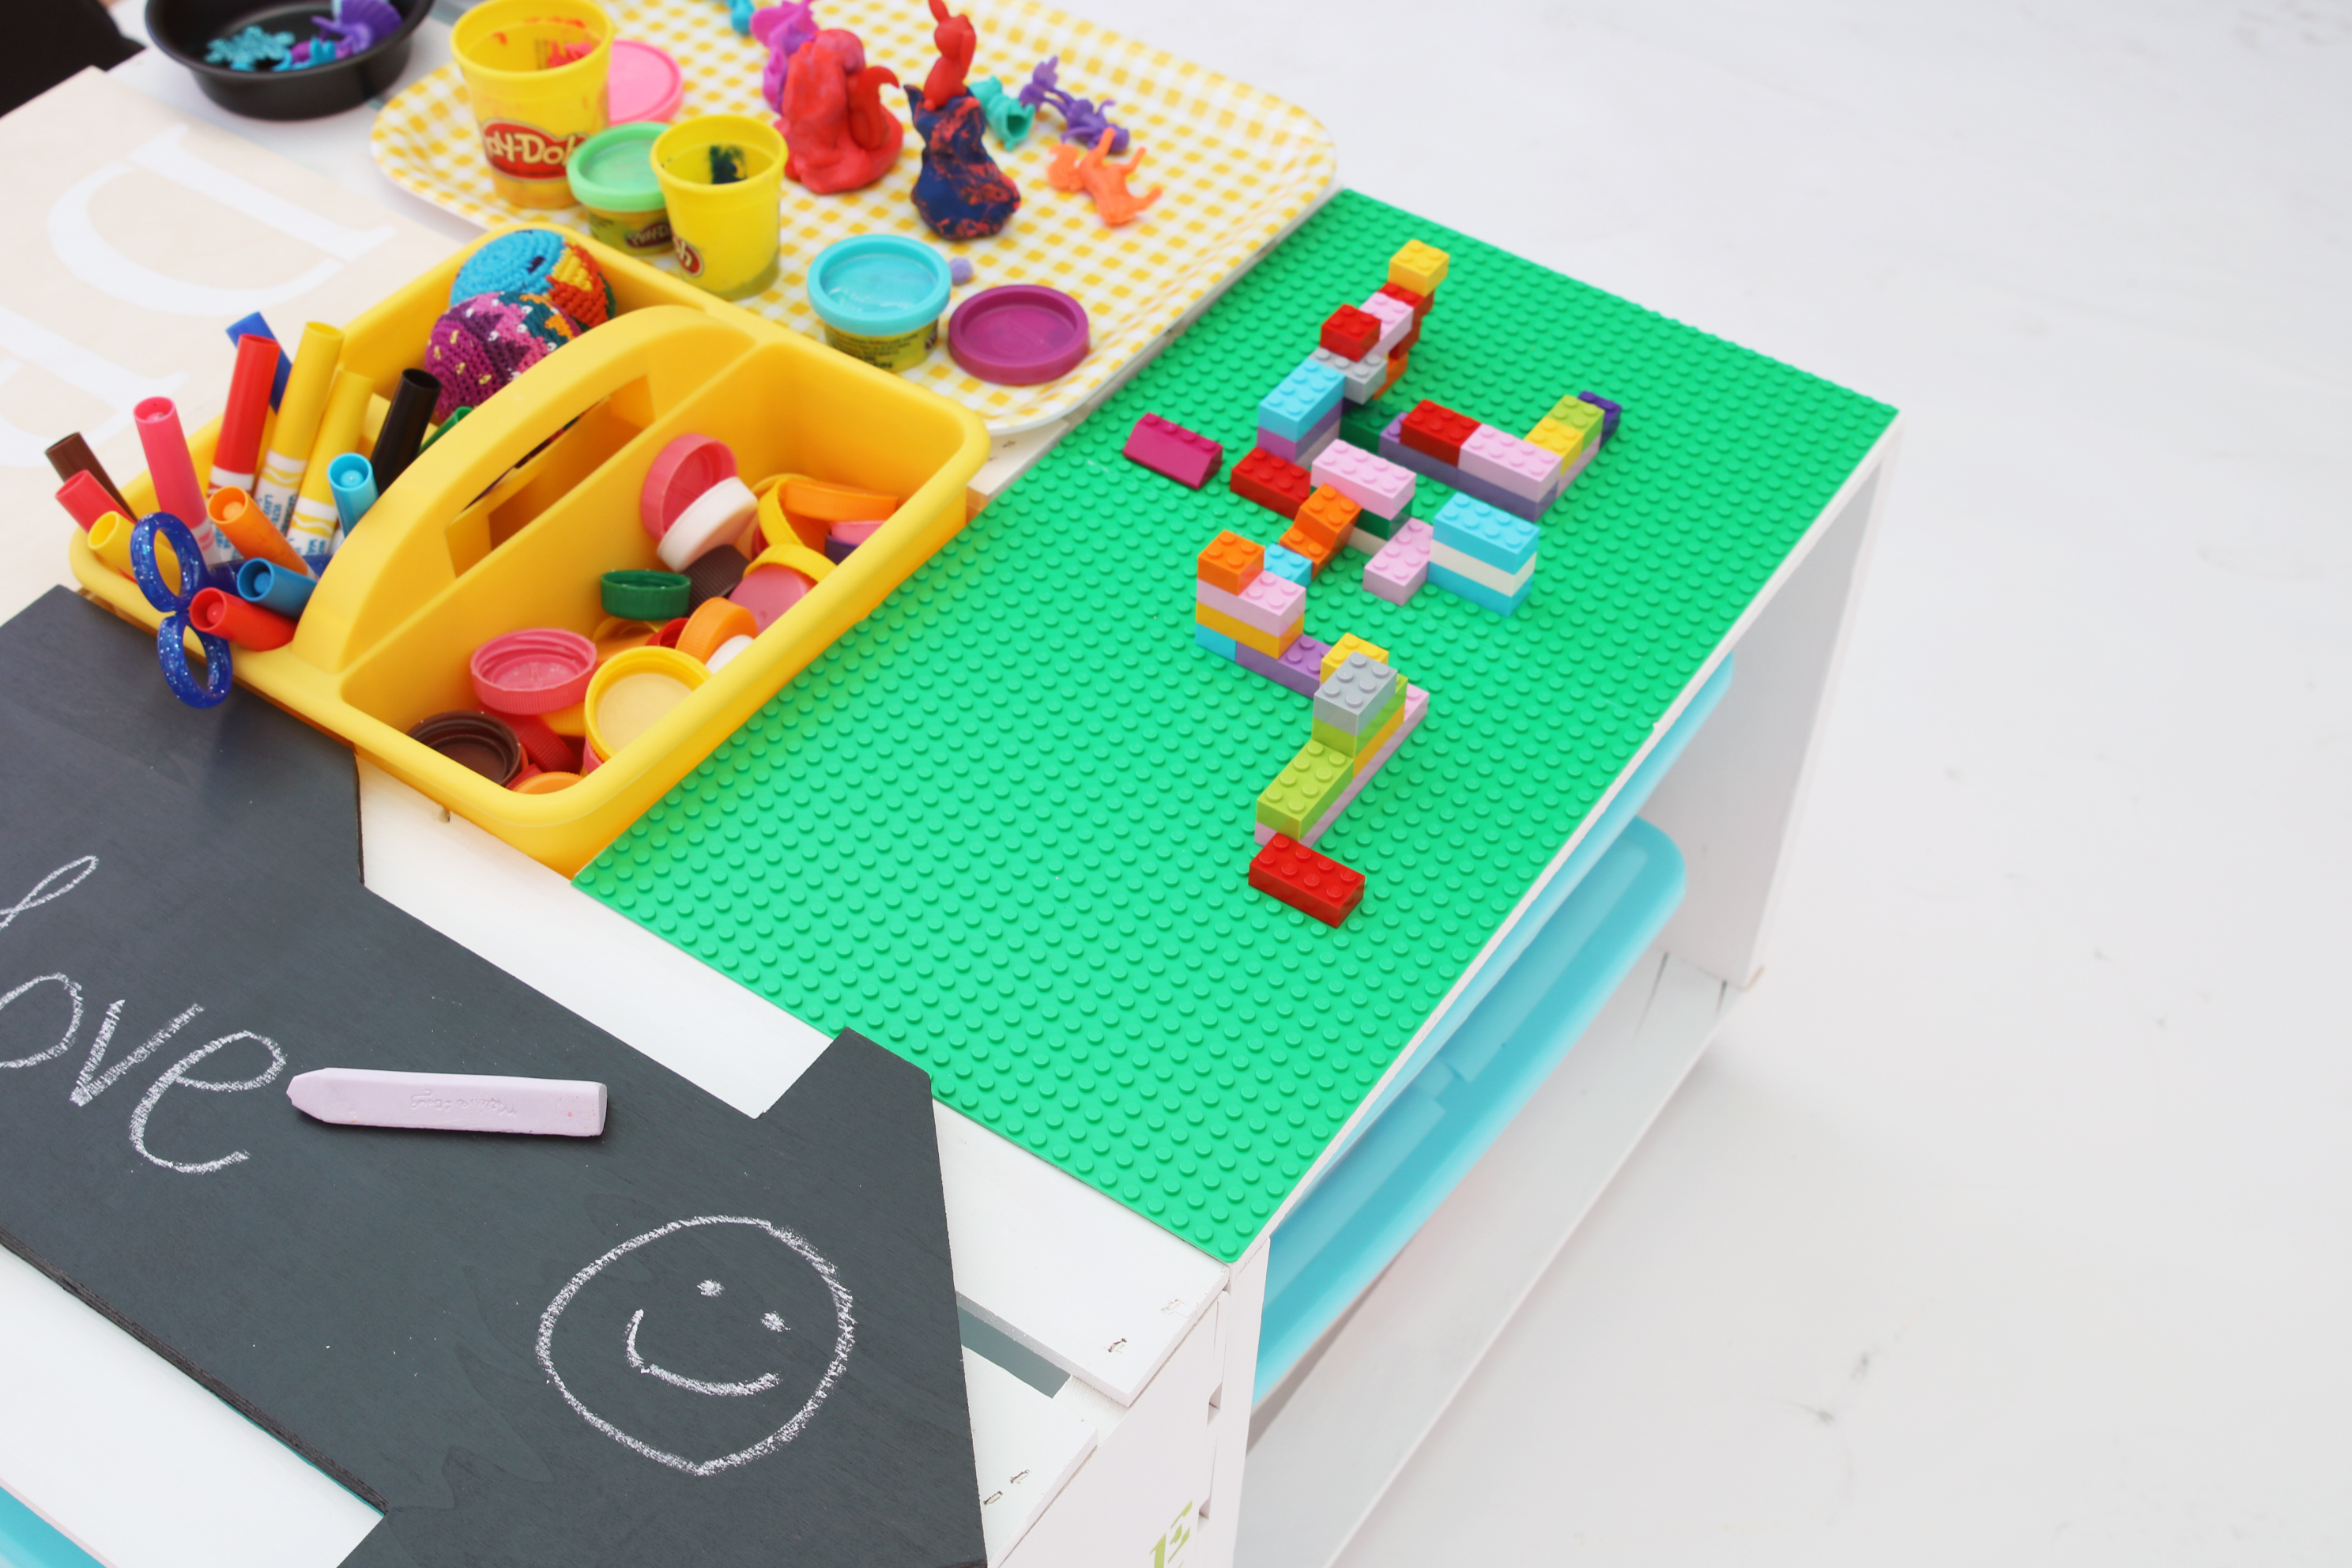 DIY Kids Activity Center / Lego Table made with 4 Wood ...